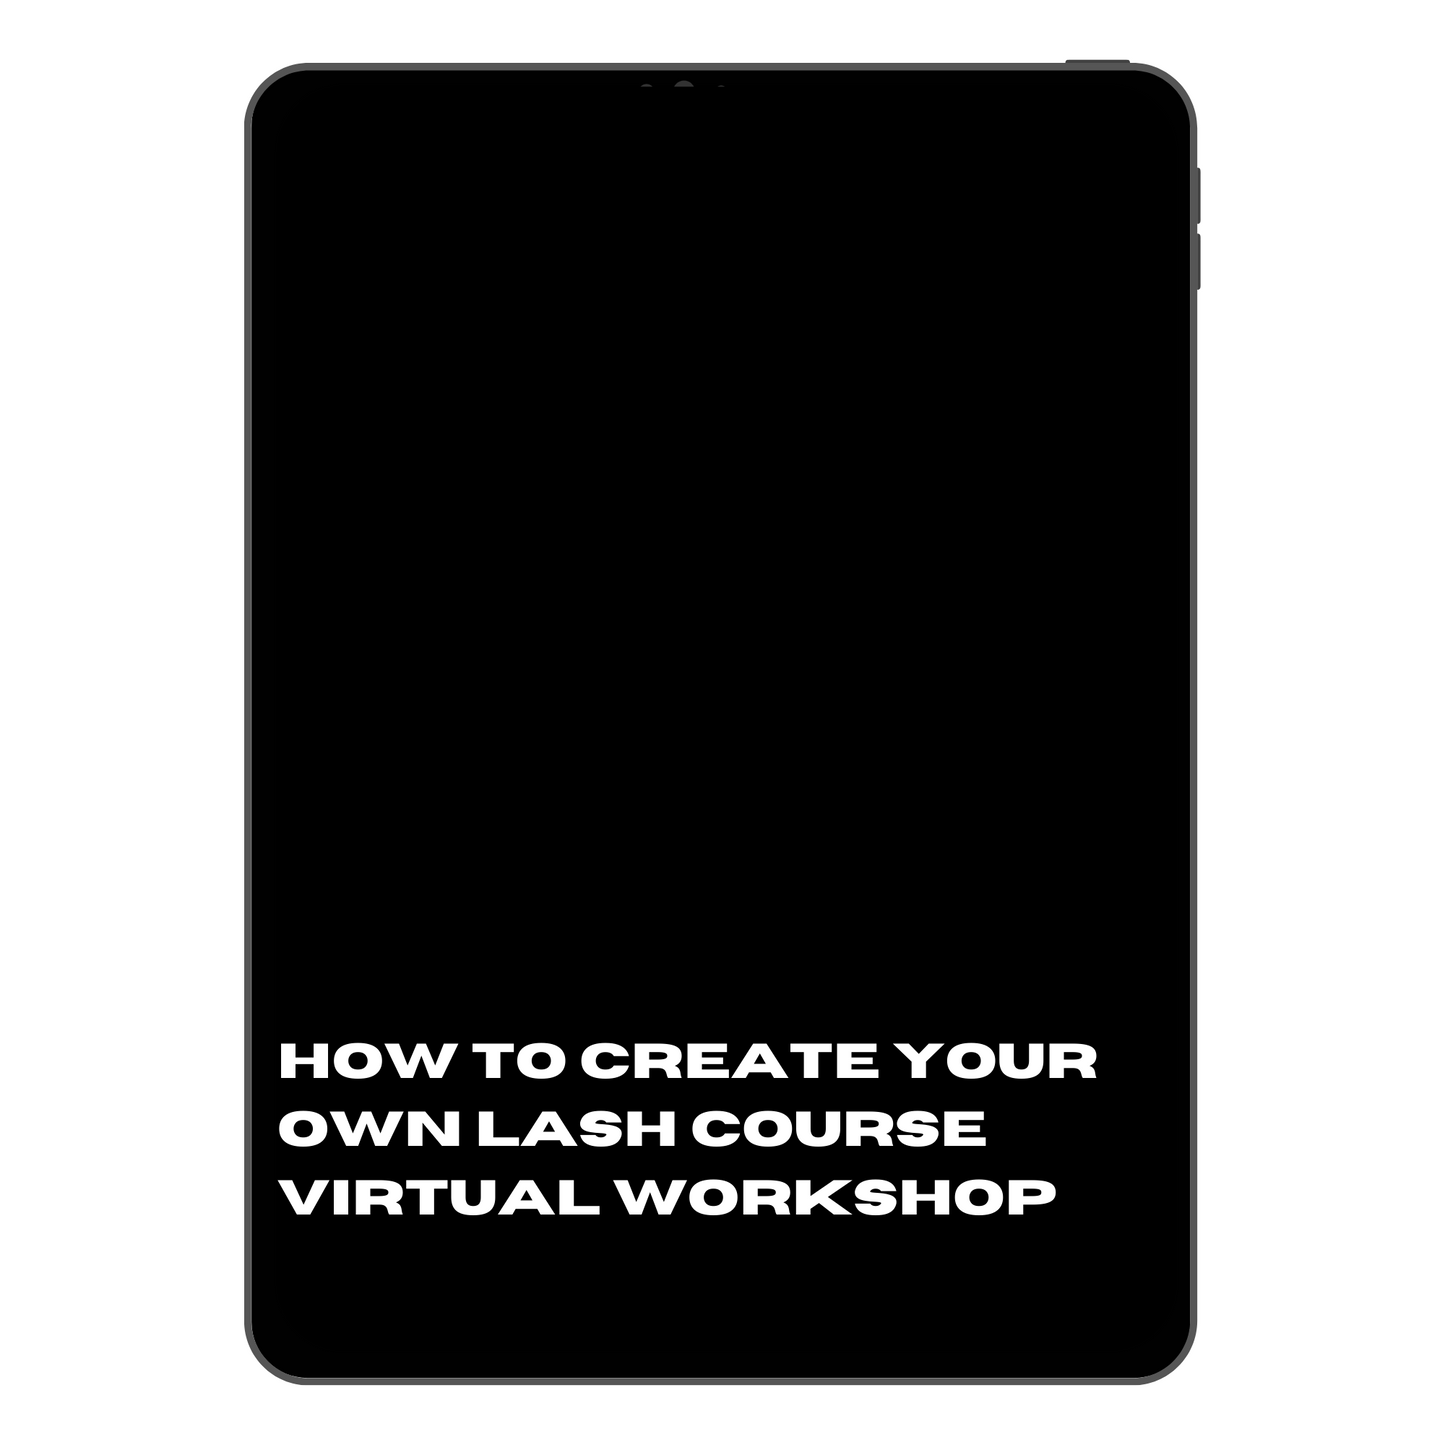 How To Create Your Own Lash Course Virtual Workshop